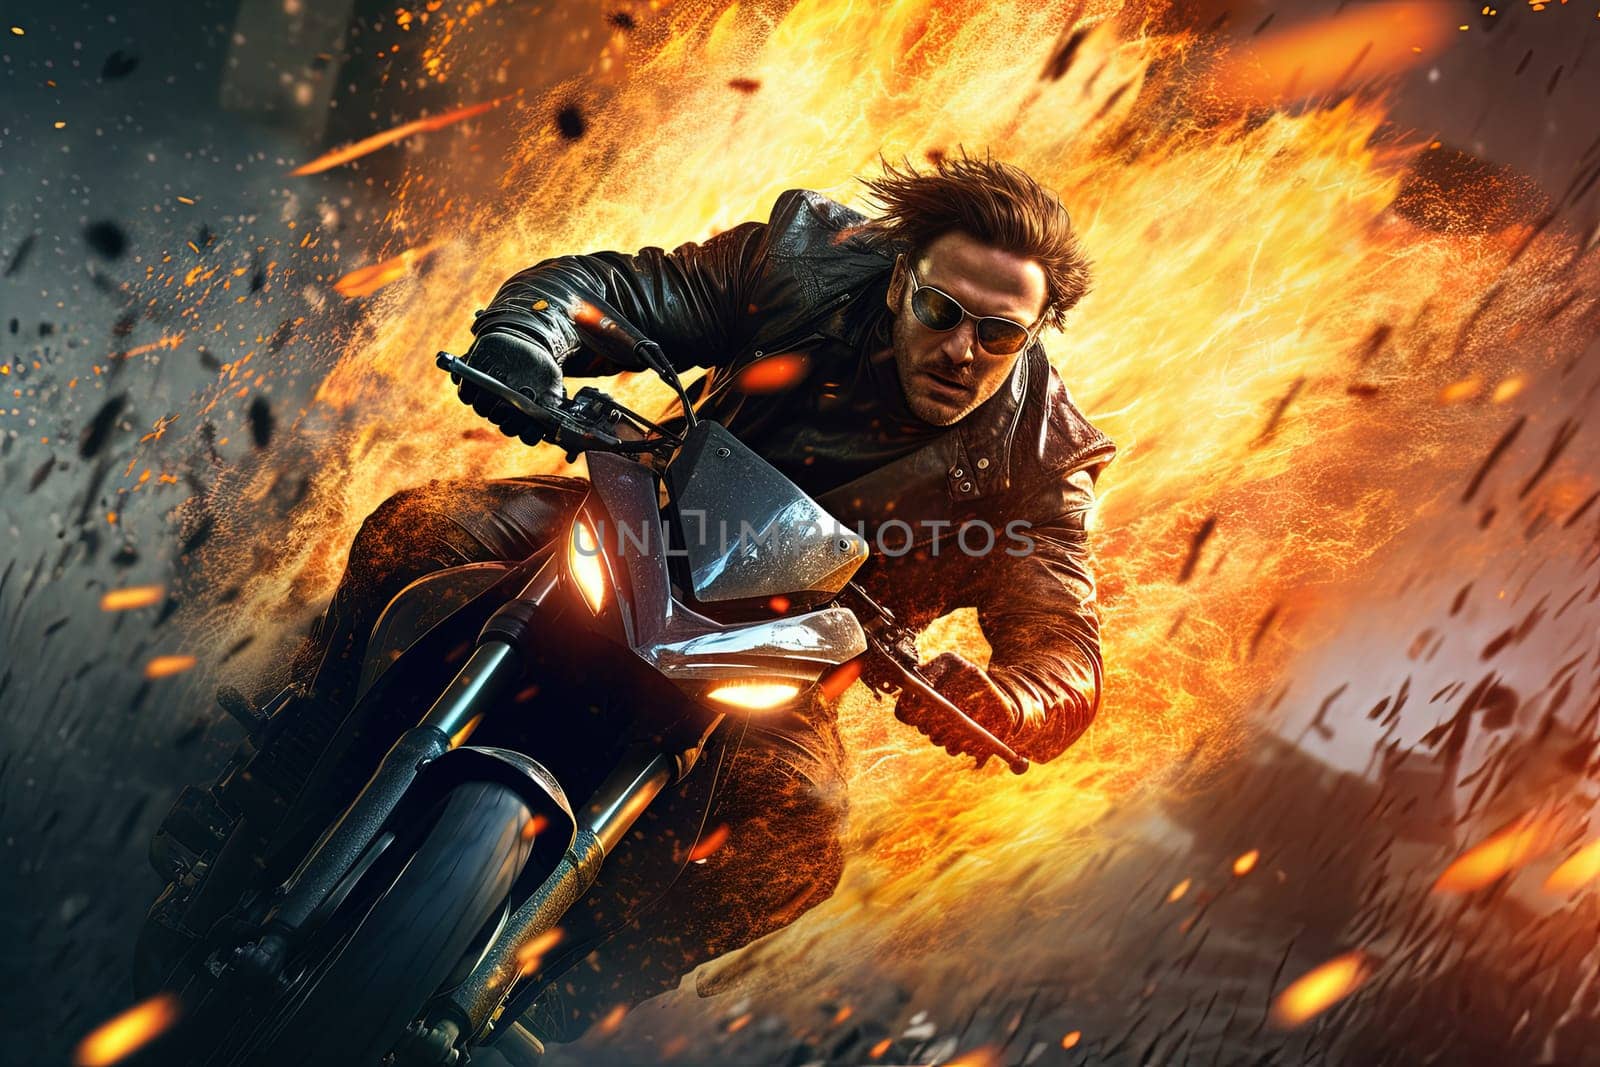 Action shot with man riding away from explosion on bike. Dynamic scene fith fire in action movie blockbuster style. Generated AI